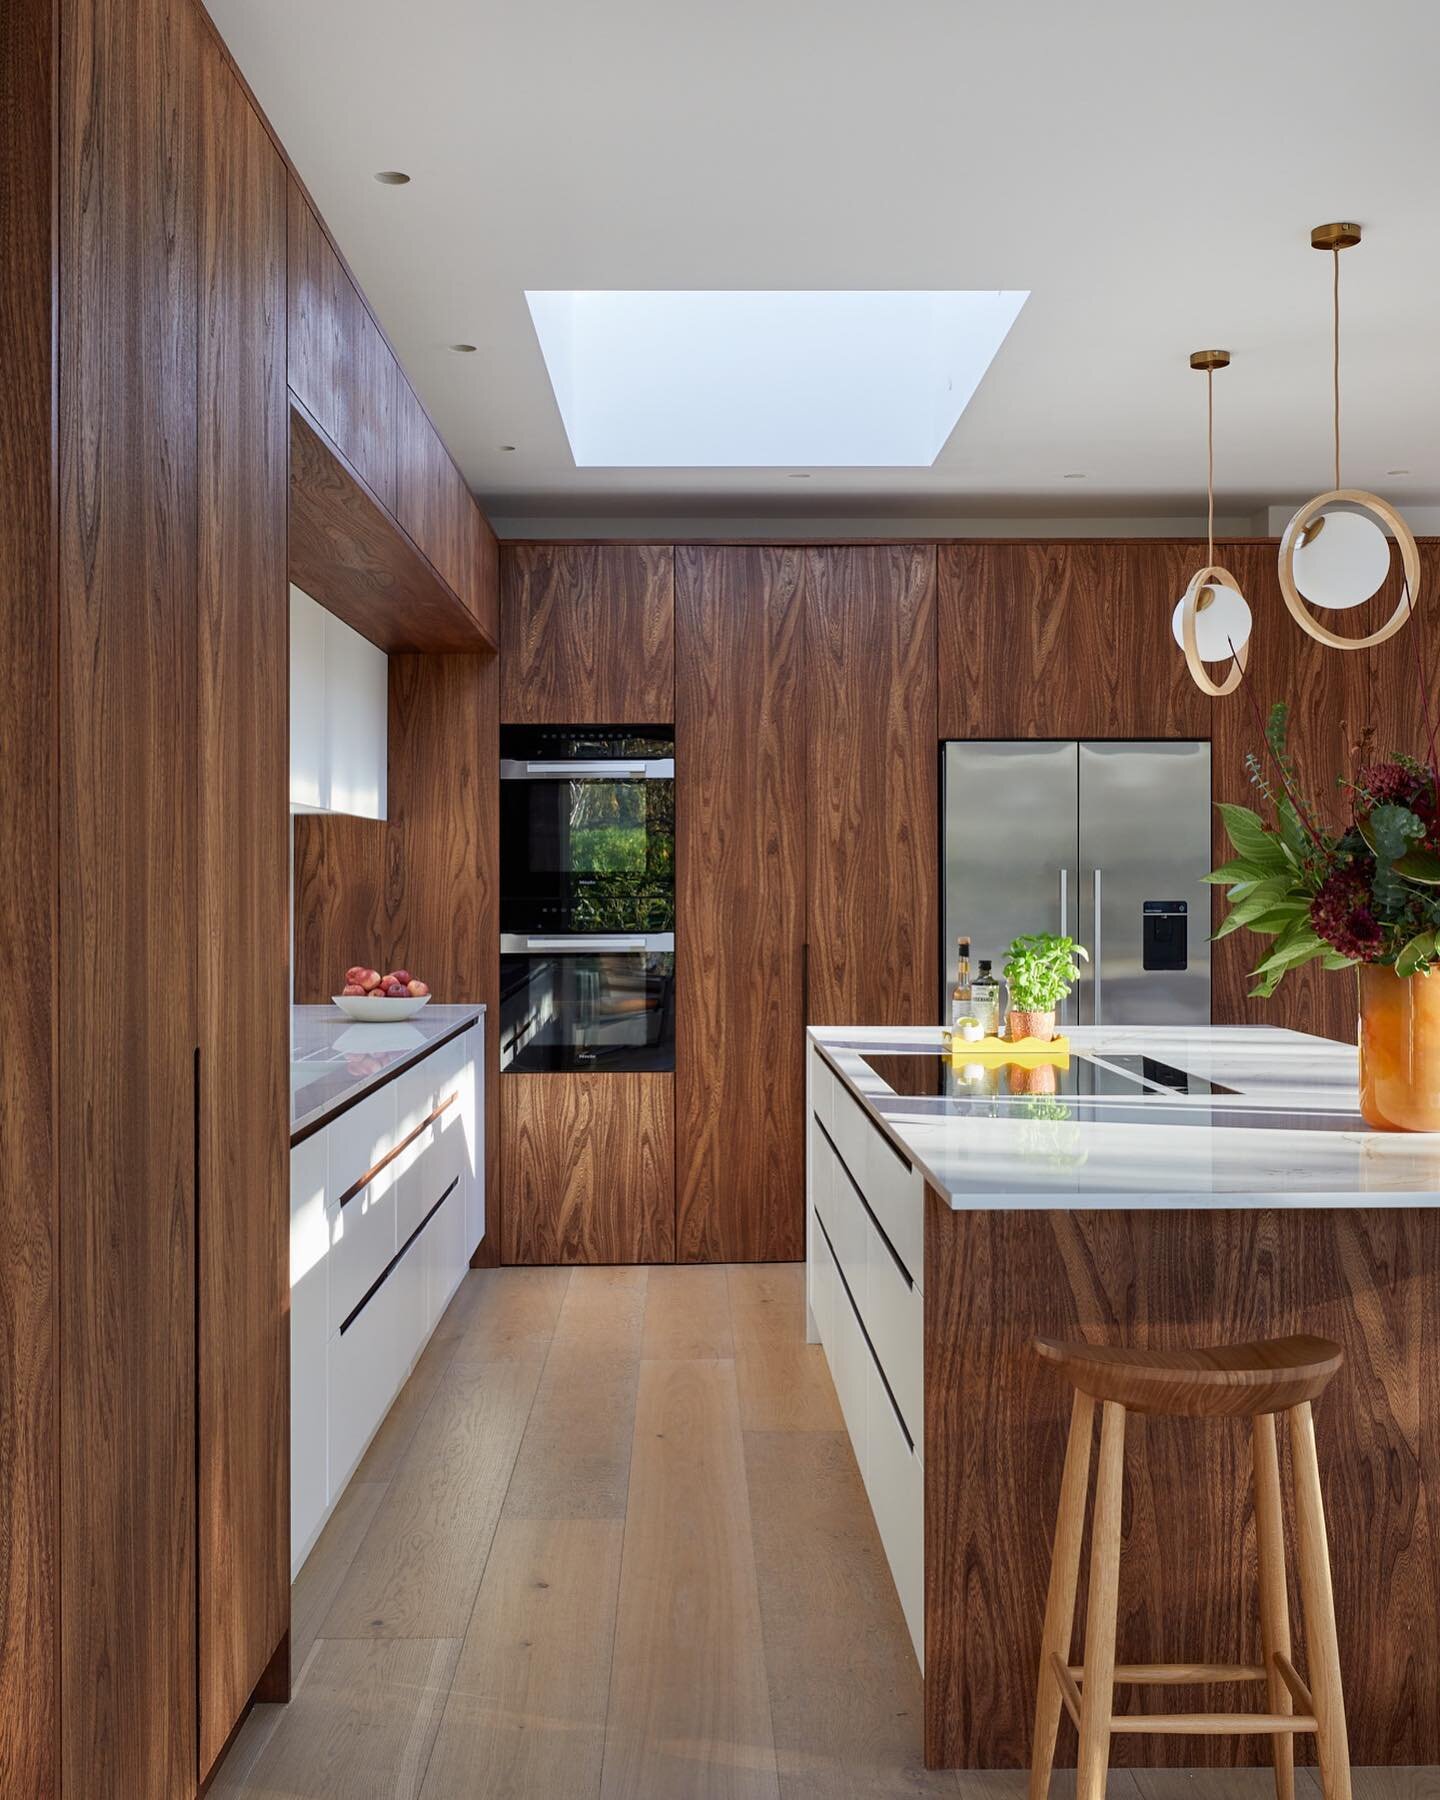 Our Alleyn park kitchen in Dulwich is a great example of how to zone a large open space in your home. Designed in collaboration with the interior designer and architect on this project we created a multifunctional space that works for the whole famil